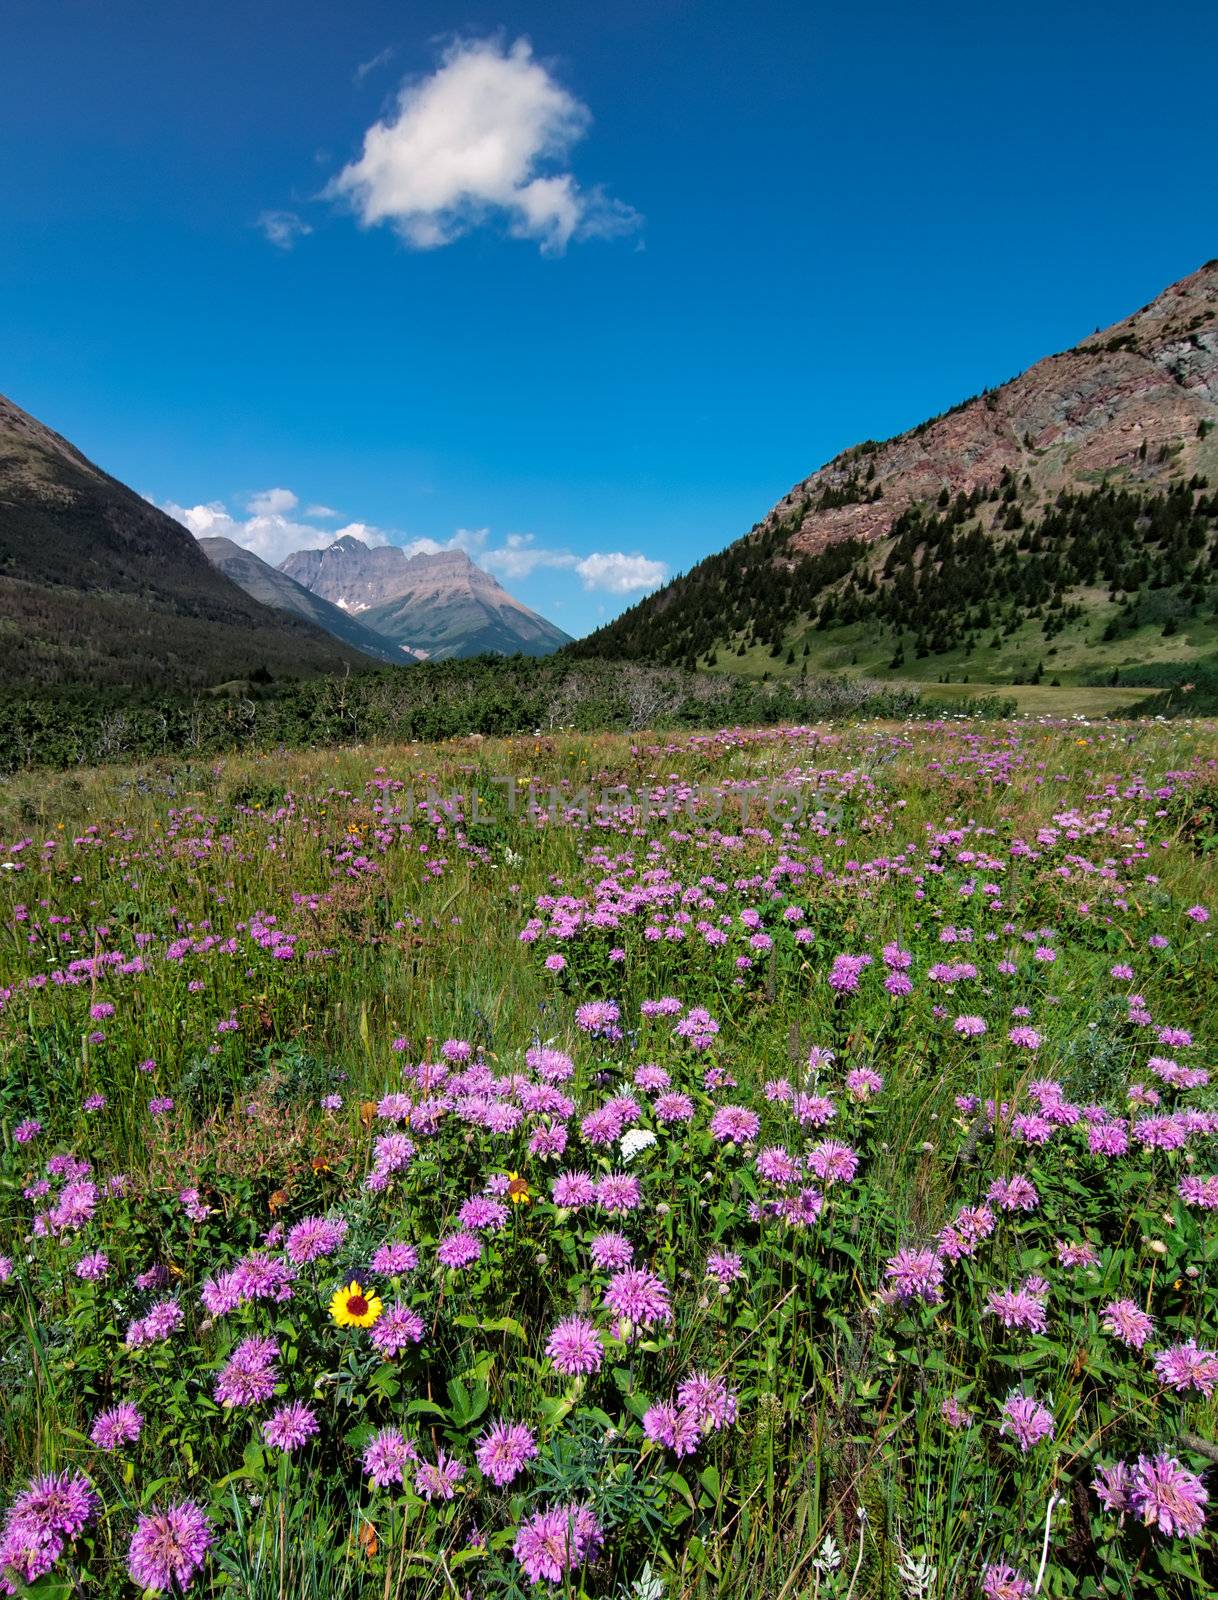 The Canadian Rocky mountains near the end of July when the purple flowers are blooming.